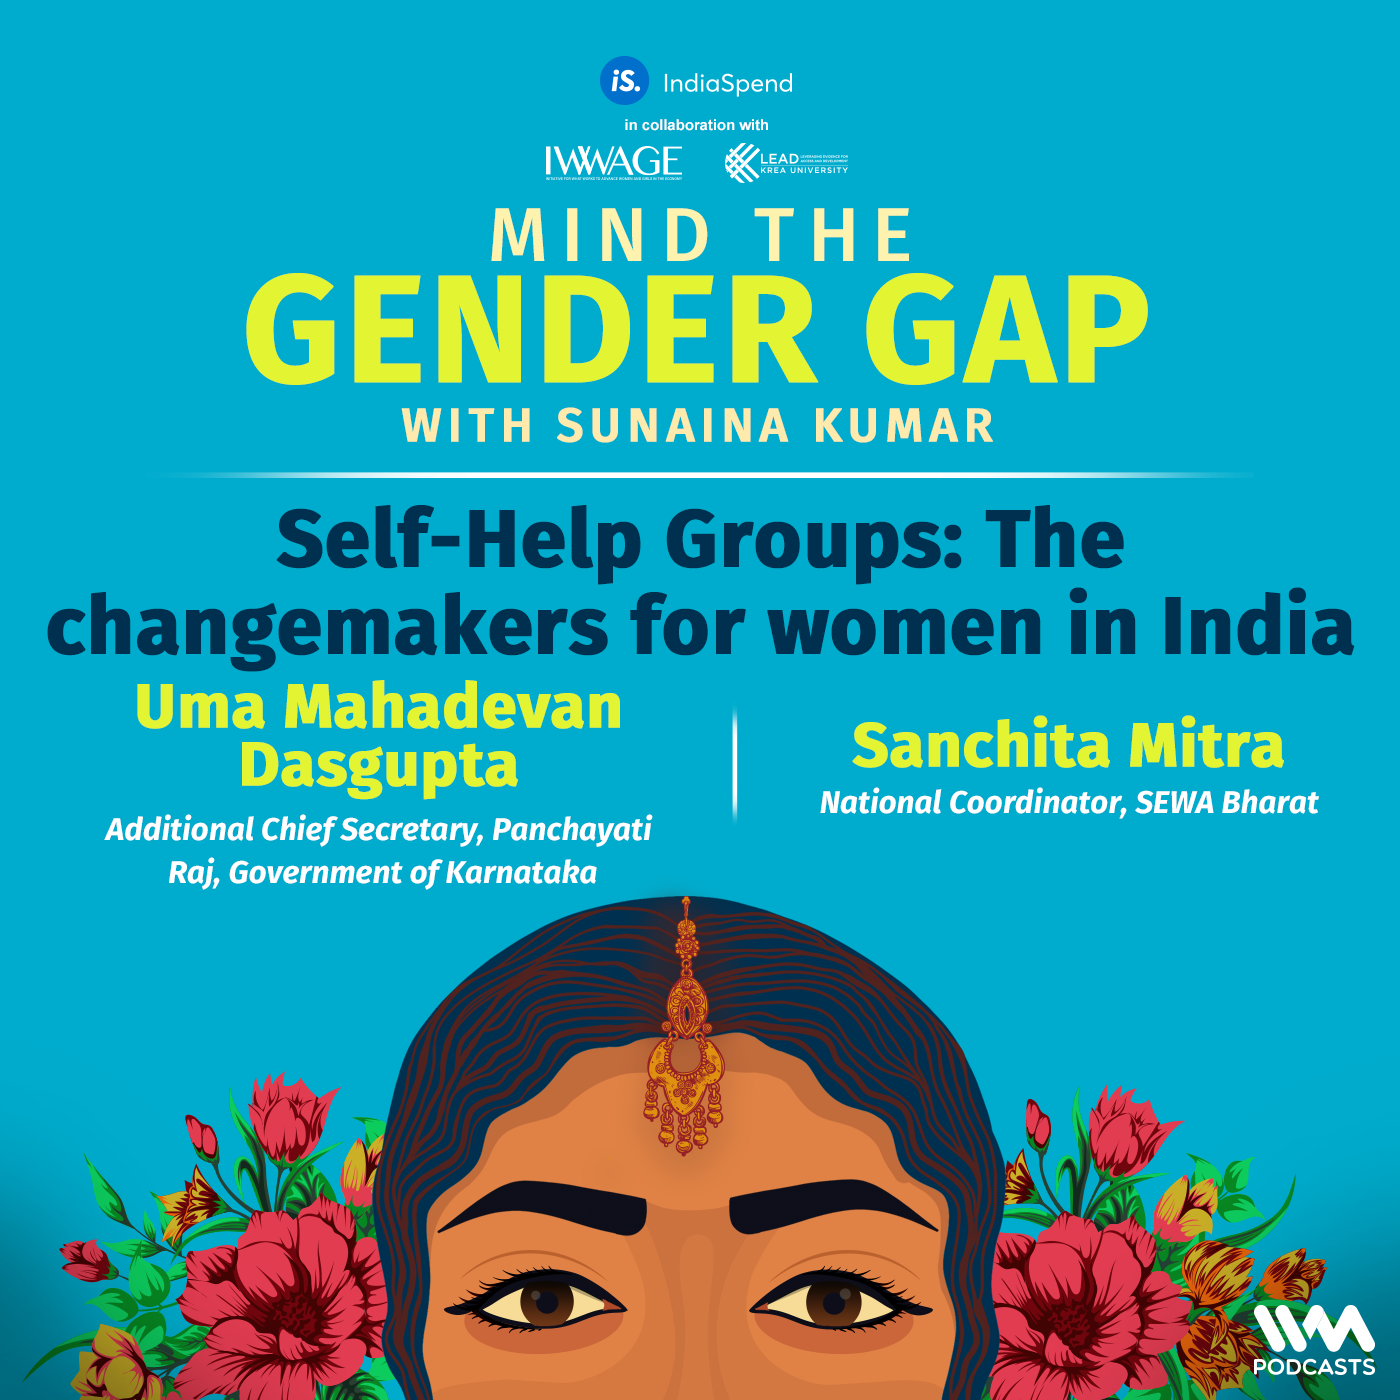 Self-Help Groups: The changemakers for women in India